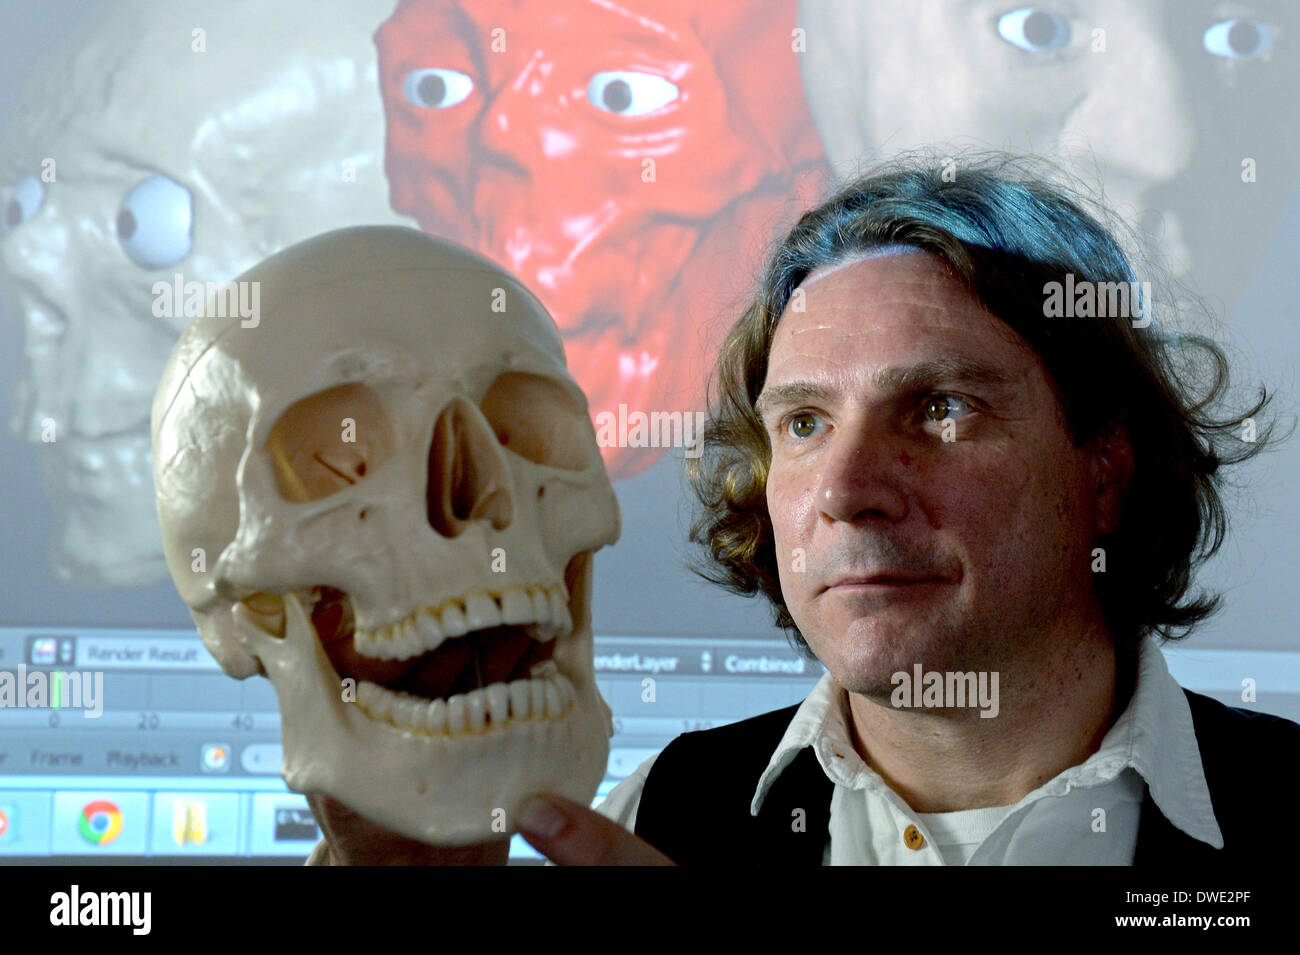 Mittweida, Germany. 06th Mar, 2014. Prof. Dirk Labudde looks at a skull in front of a computer screen with a digital facial reconstruction as part of the course "digital forensics" at the academy in Mittweida, Germany, 06 March 2014. A new bachelor program "general and digital forensics" will be offered for the coming winter semester. Mittweida researchers have already been working in cooperation with the police for a long time in this area. The police see ever increasing demands and needs for specialists in connection with cyber crime. Photo: HENDRIK SCHMIDT/dpa/Alamy Live News Stock Photo